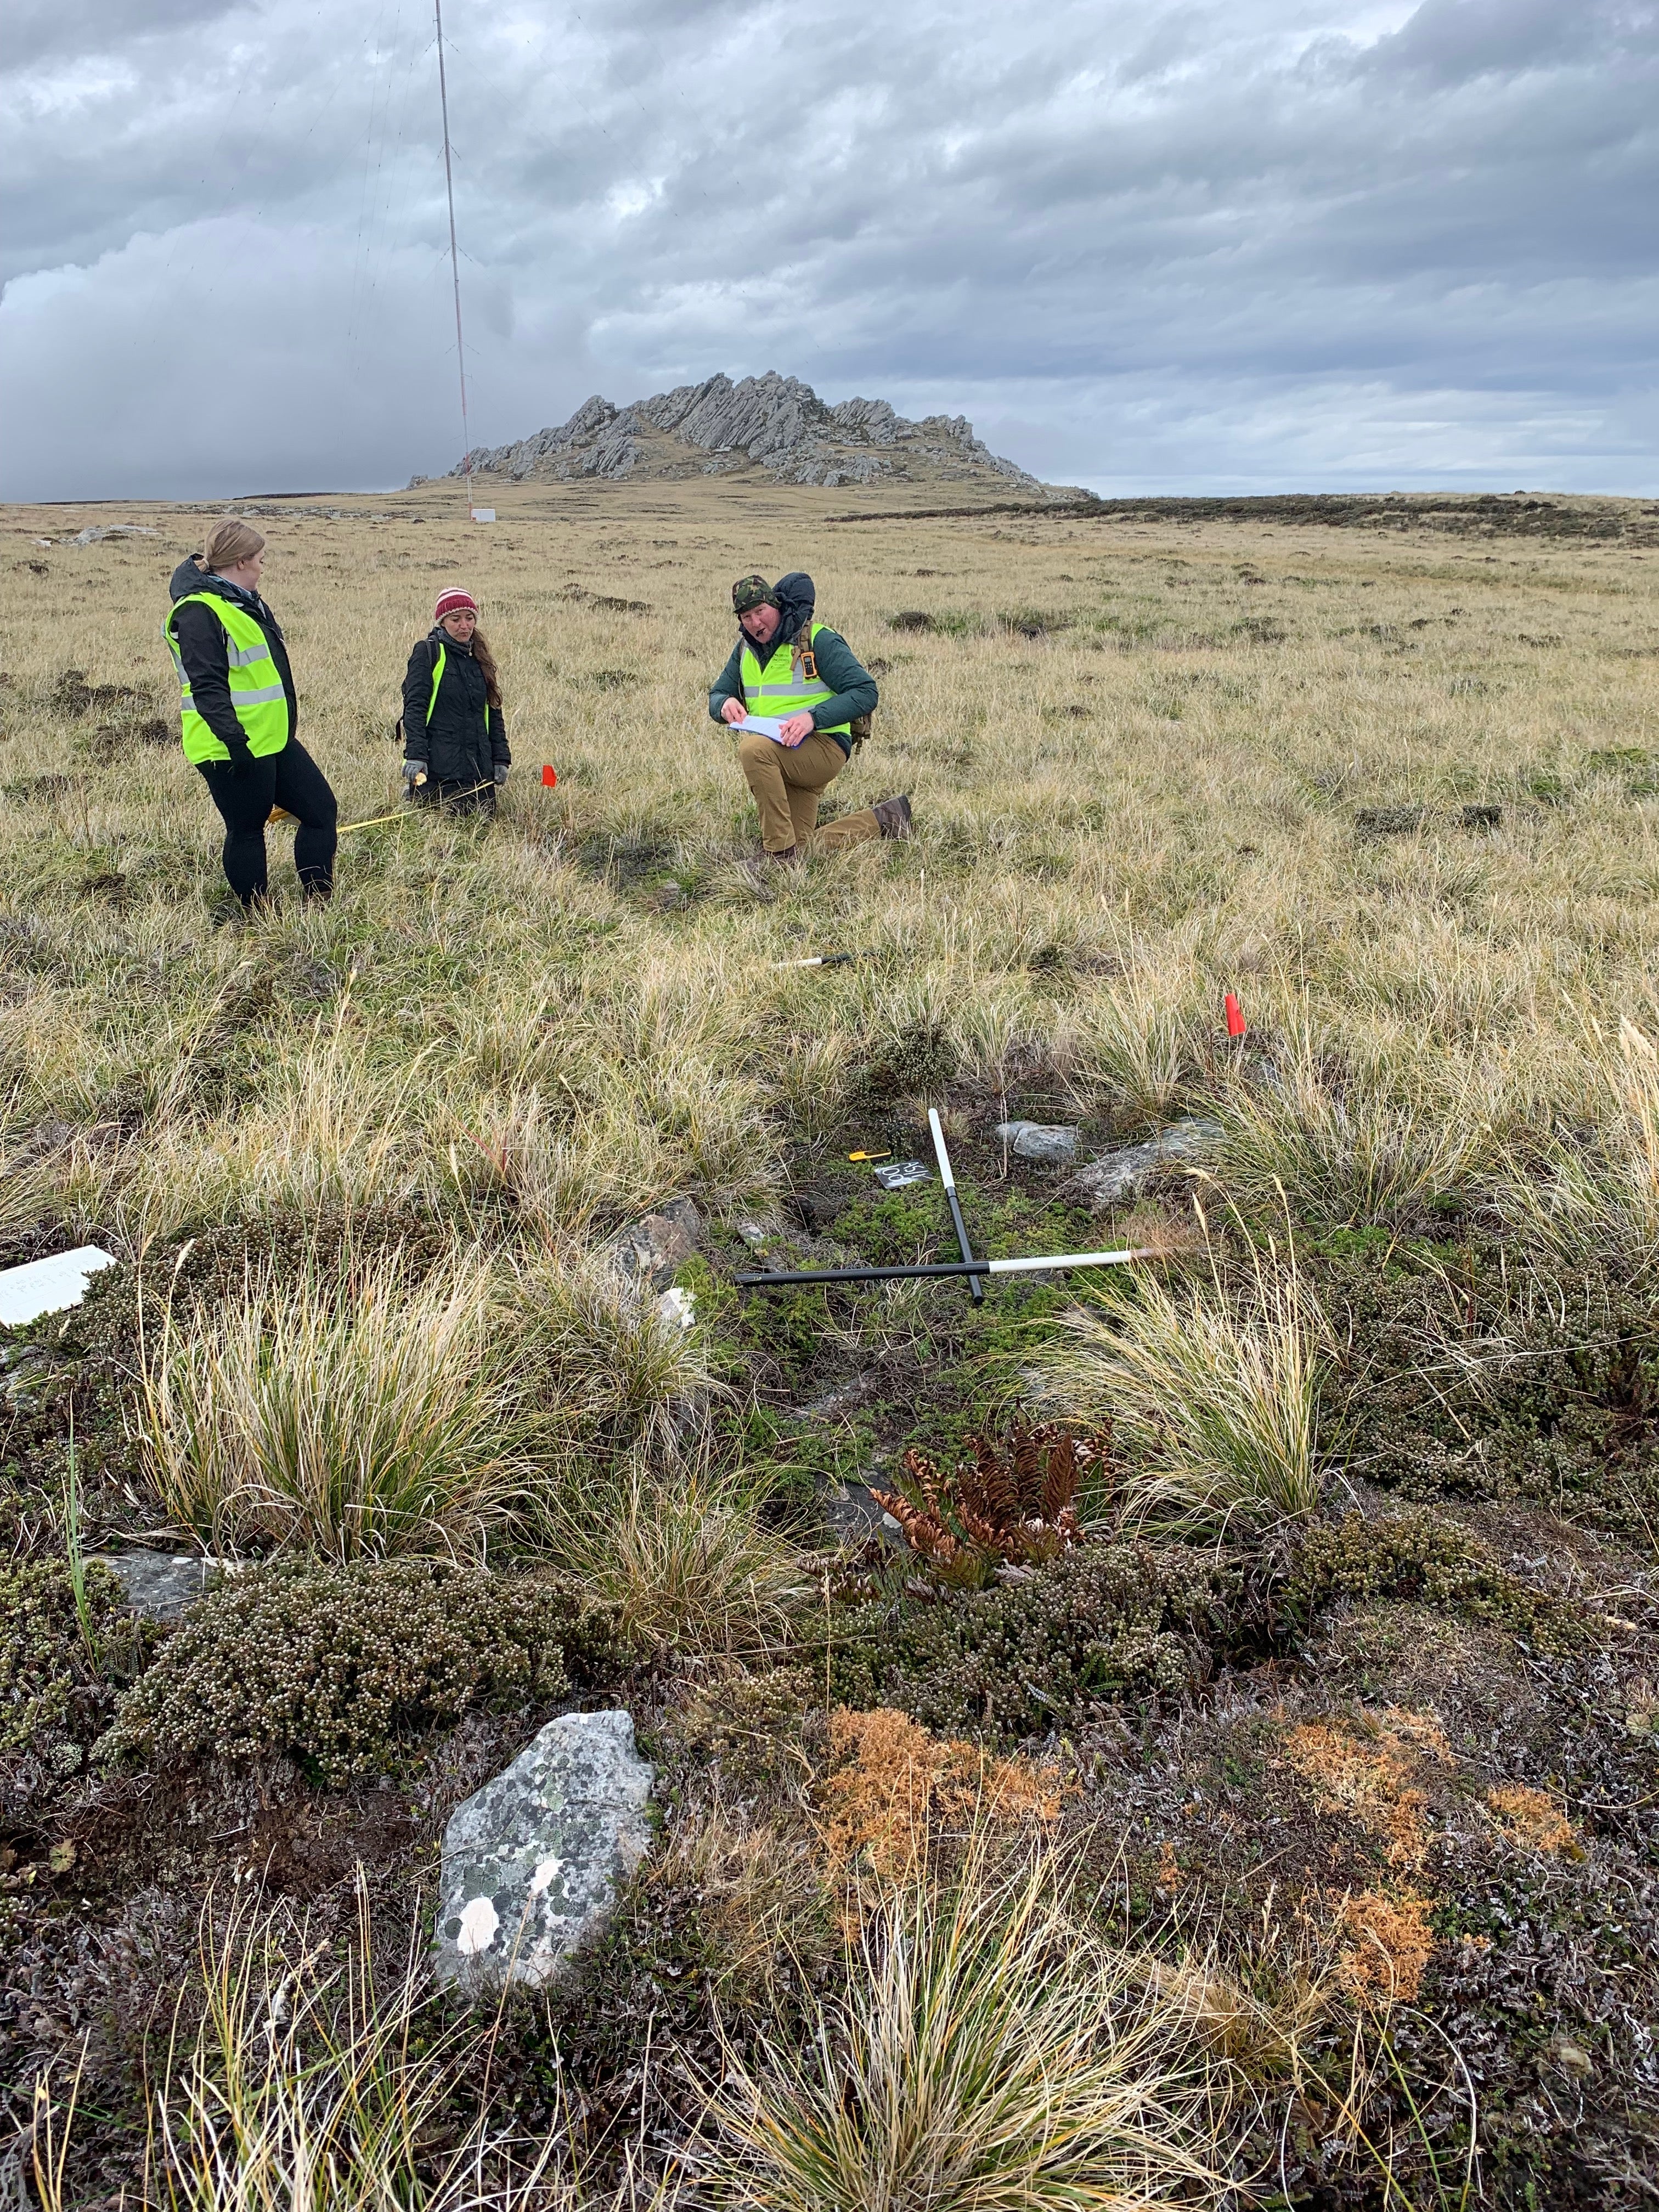 Veterans and archaeologists are working together on the first archaeological survey of Falklands battlegrounds (Falklands War Mapping Project/PA)